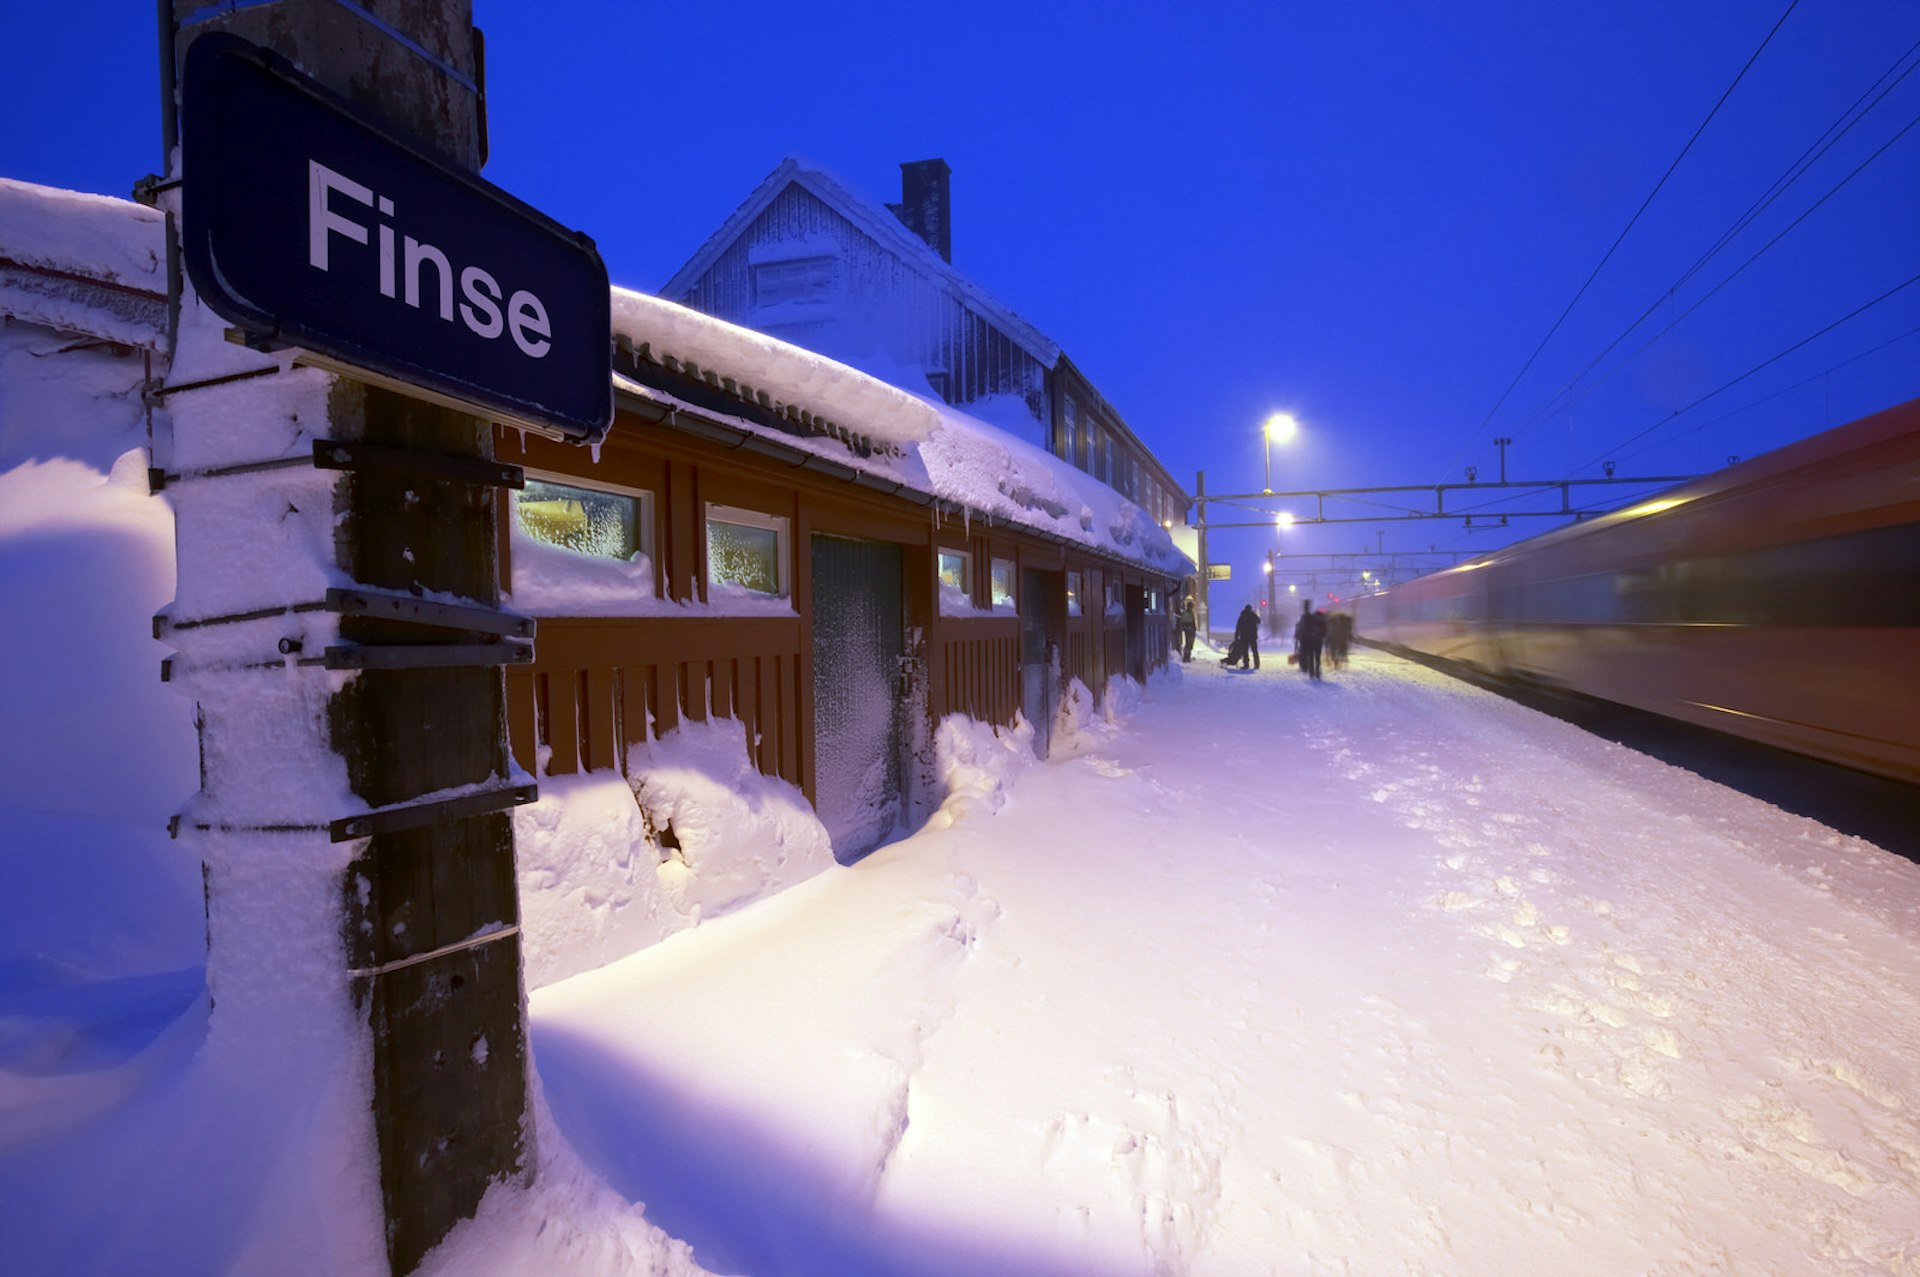 A snowy-looking Finse station in Norway